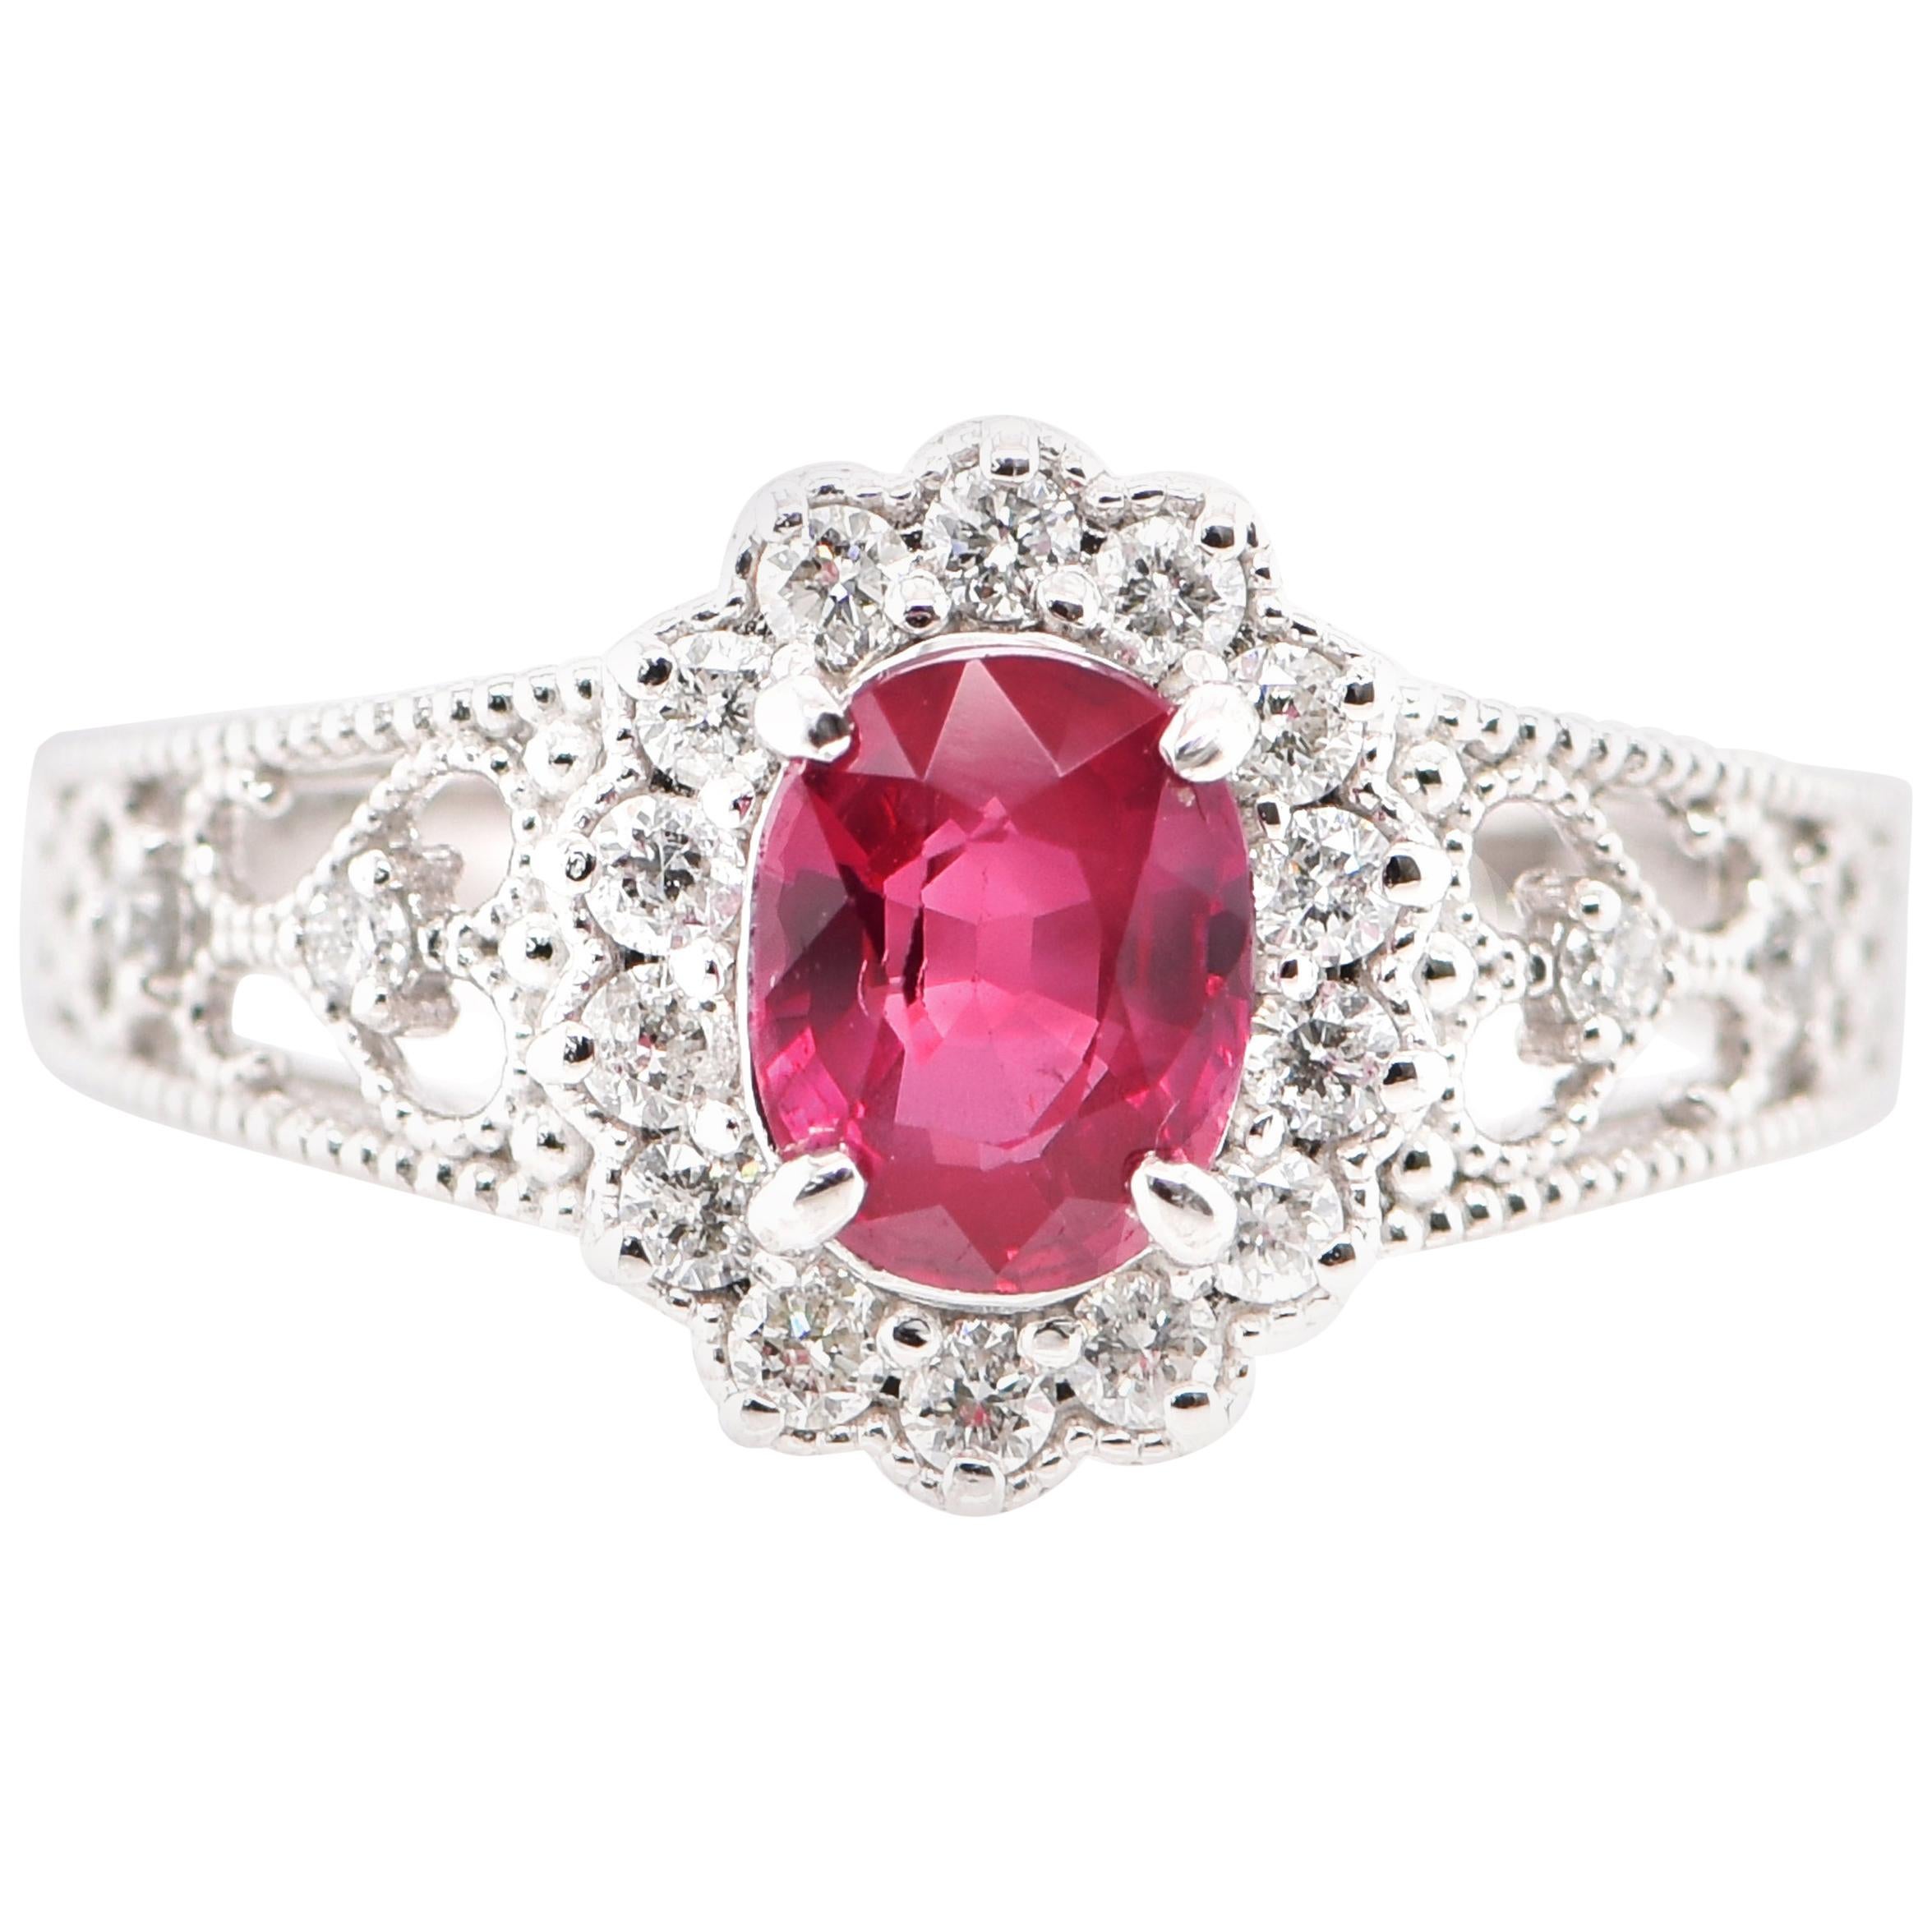 1.108 Carat Natural Untreated 'No Heat' Ruby and Diamond Ring Set in Platinum